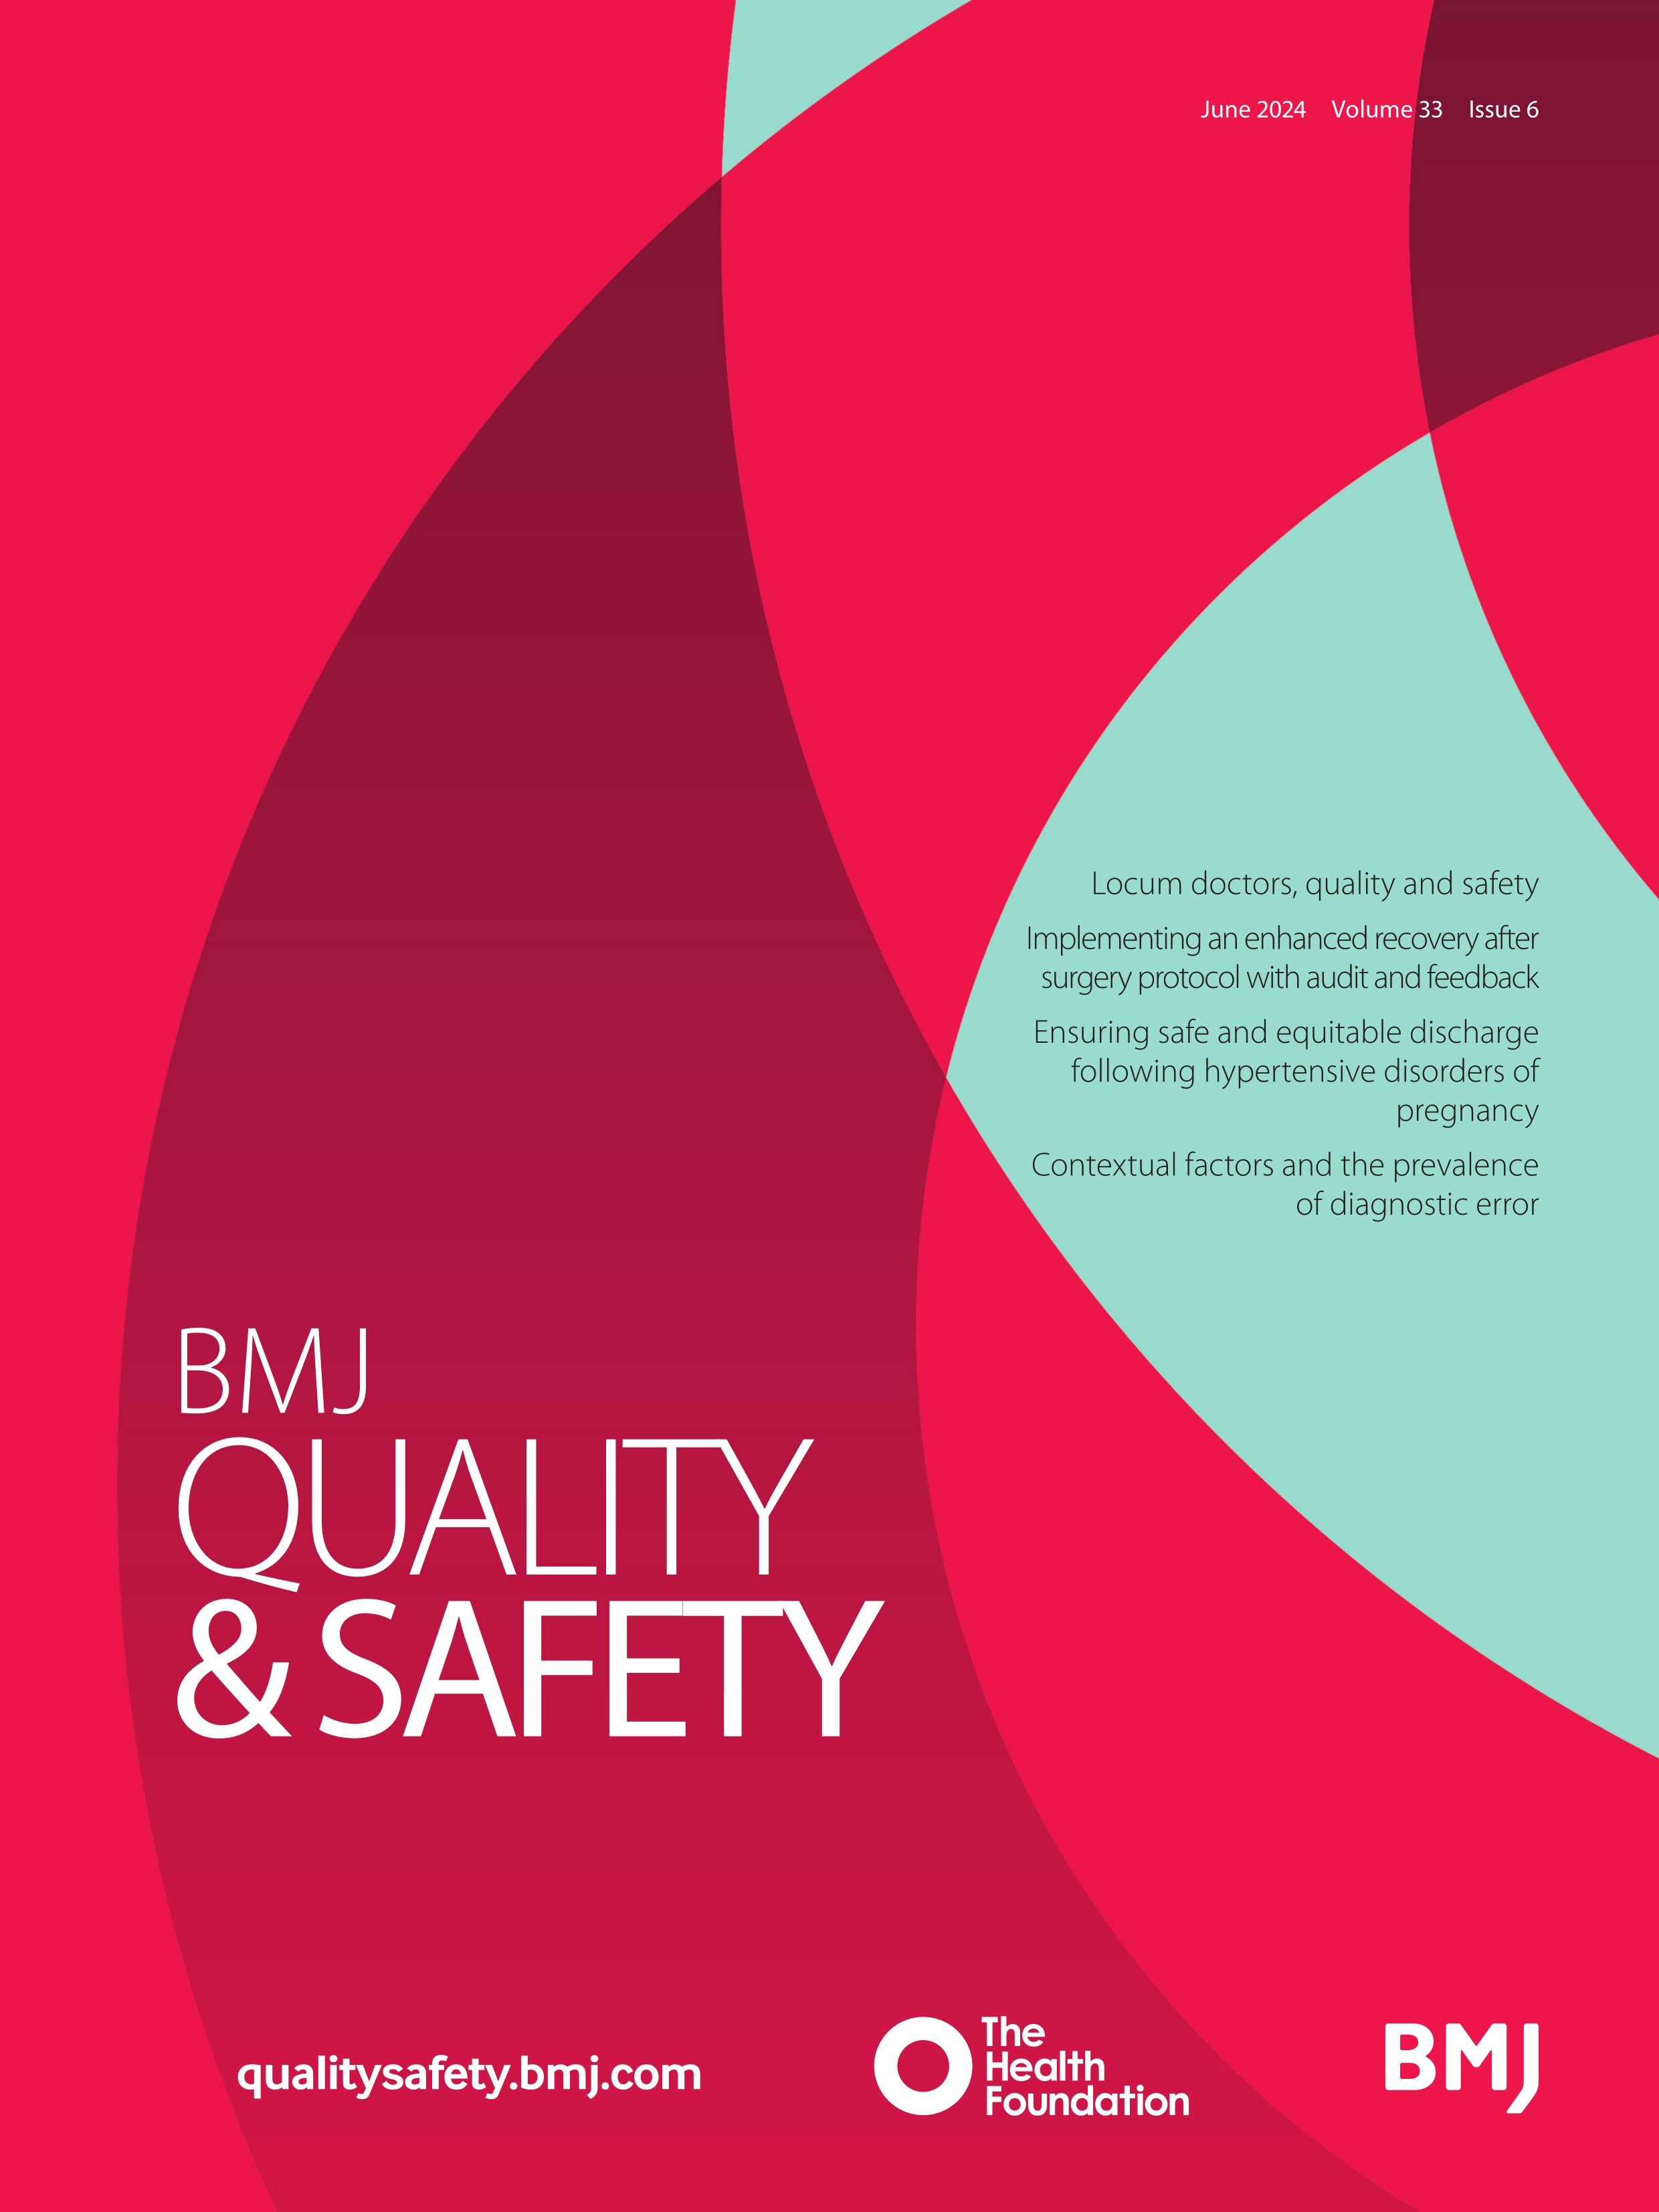 Locum doctor working and quality and safety: a qualitative study in English primary and secondary care